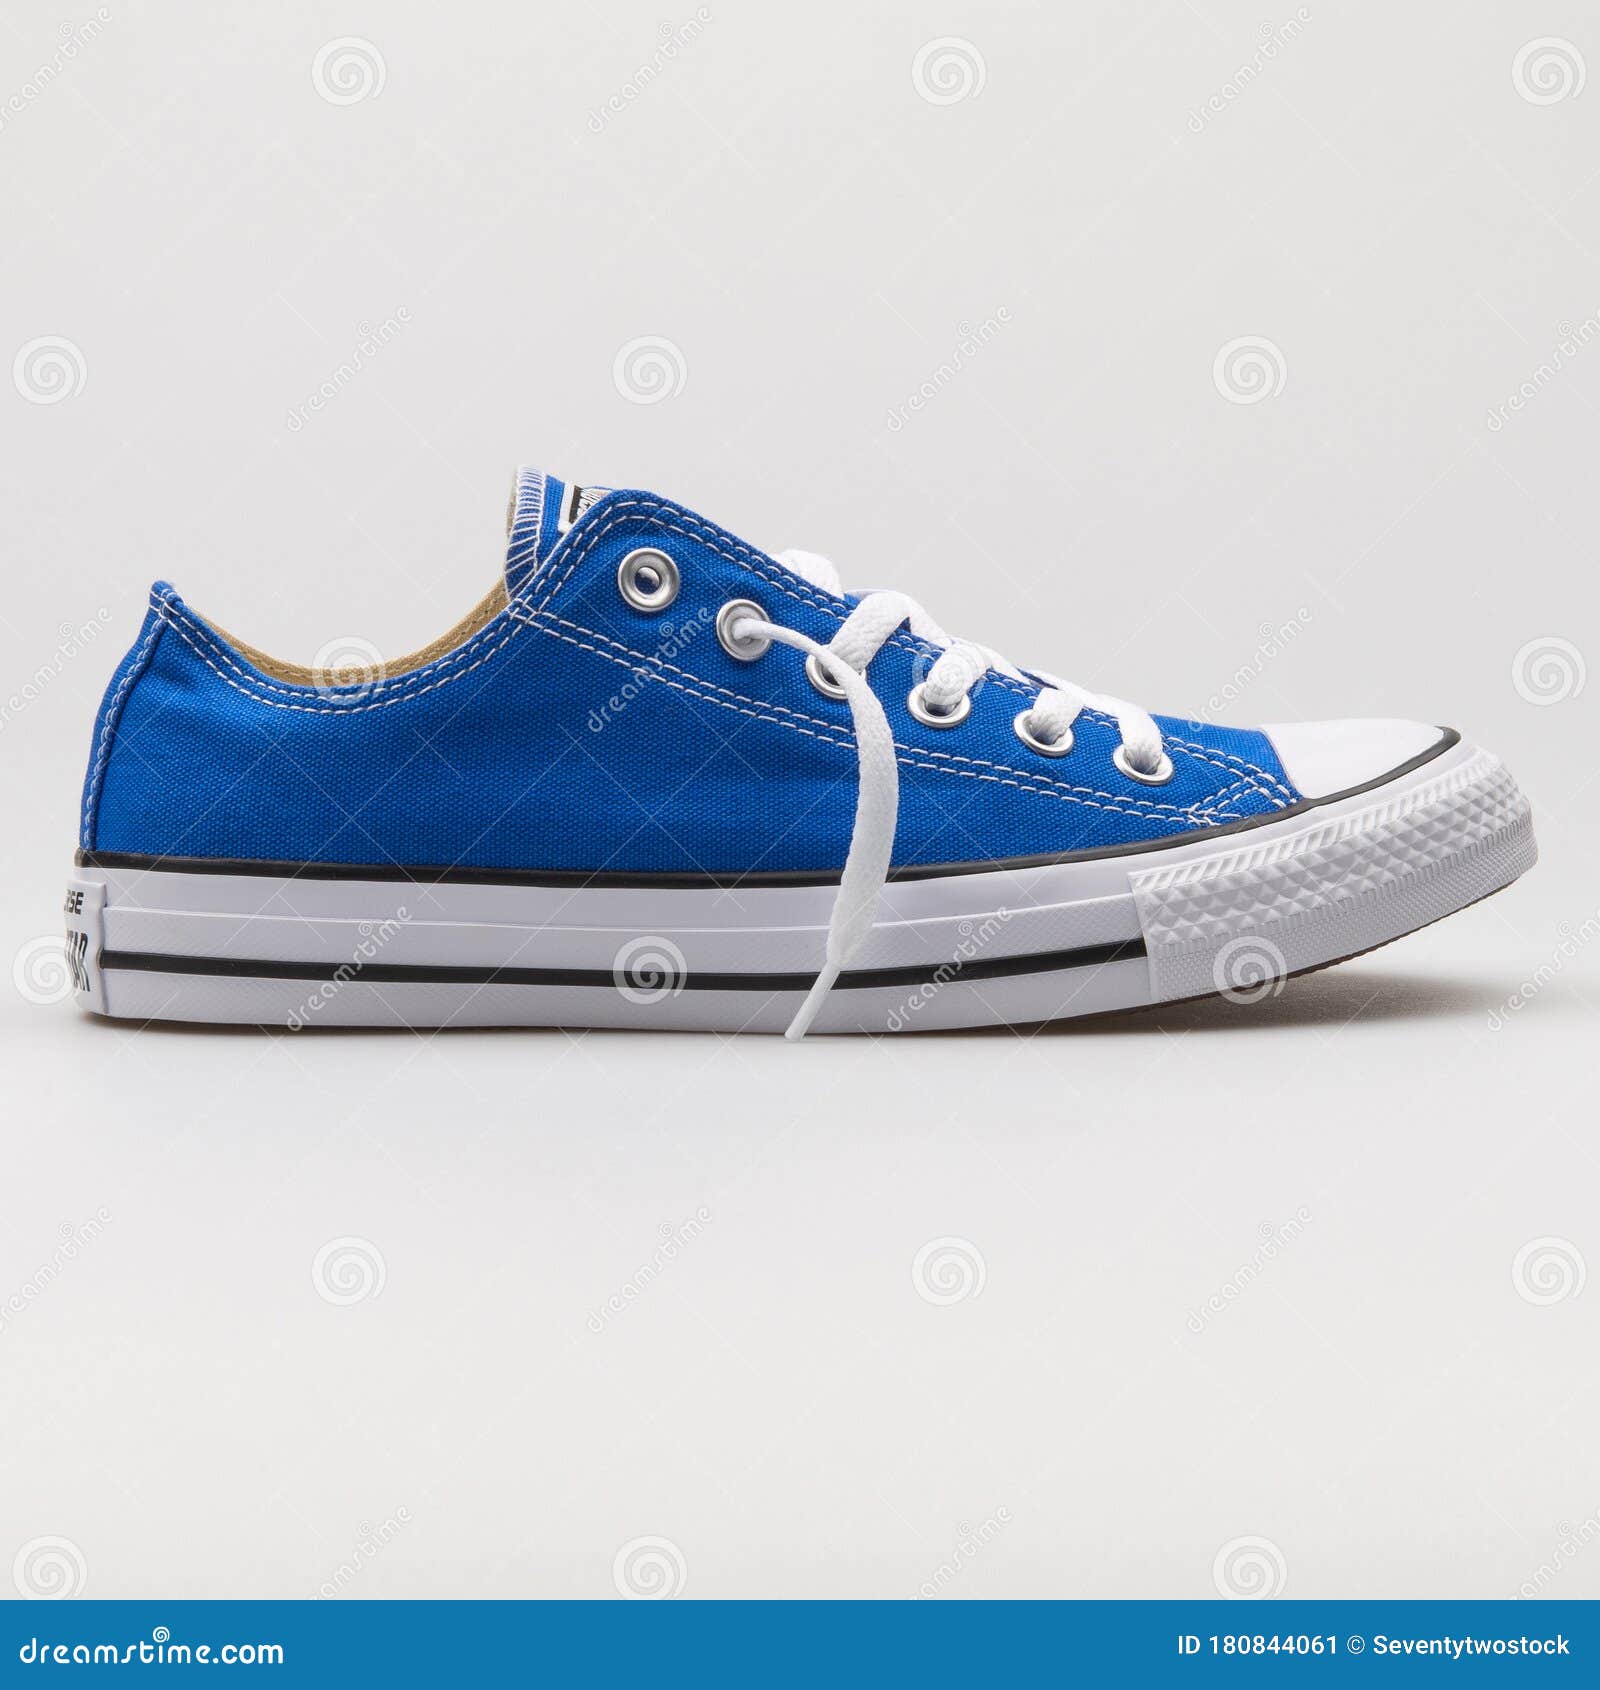 Converse Chuck Taylor All Star OX Royal and White Sneaker Editorial Photo - Image of kicks, object: 180844061